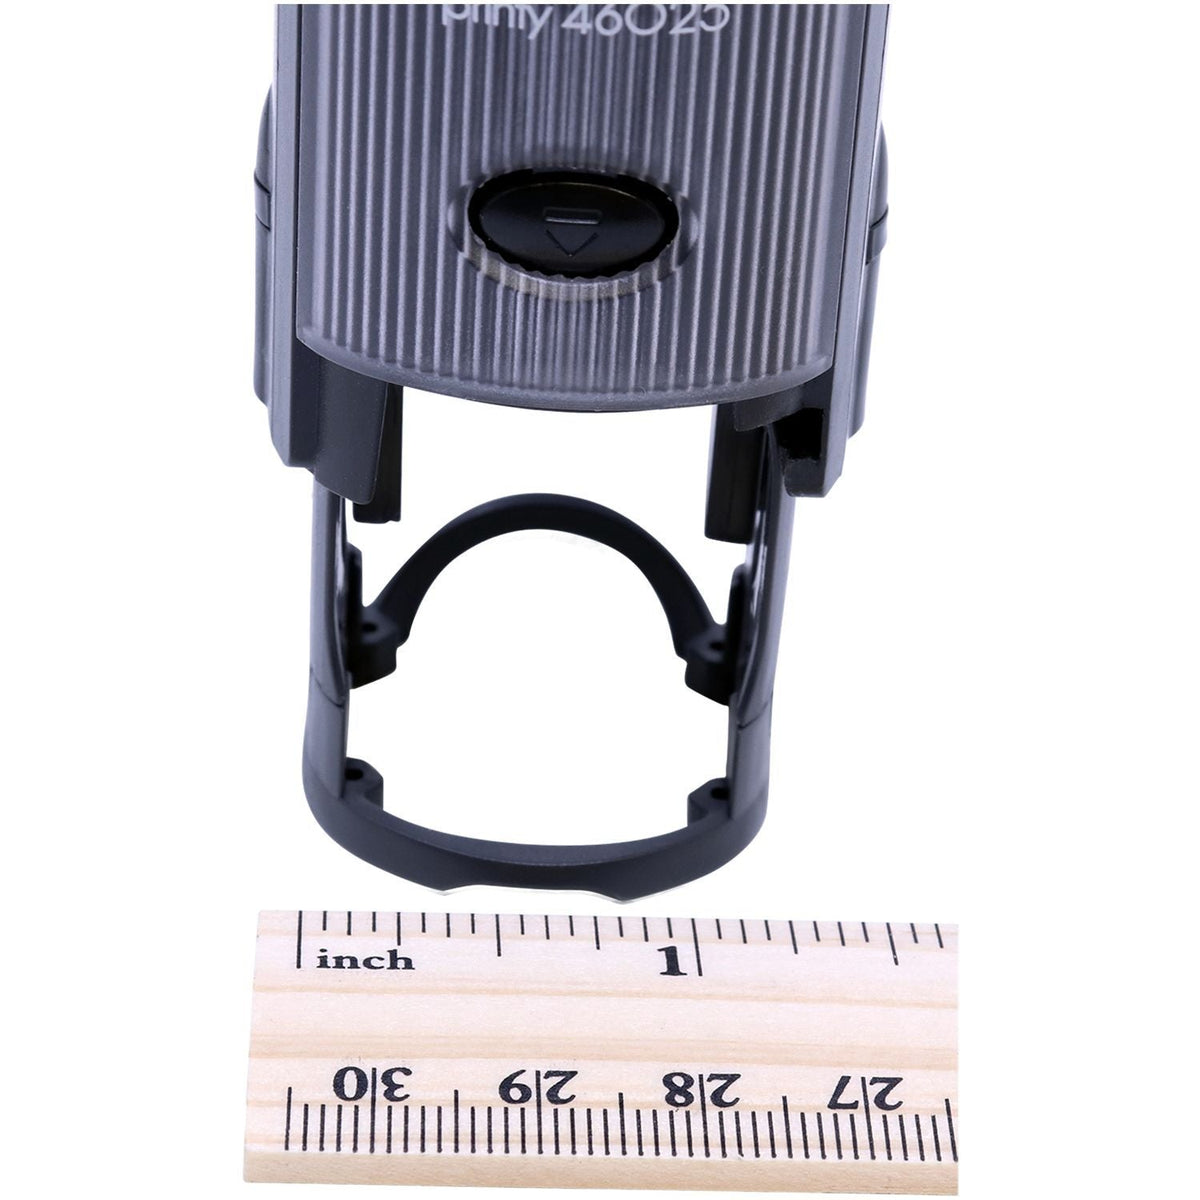 Measurment of Self-Inking Round Copy Stamp with Ruler